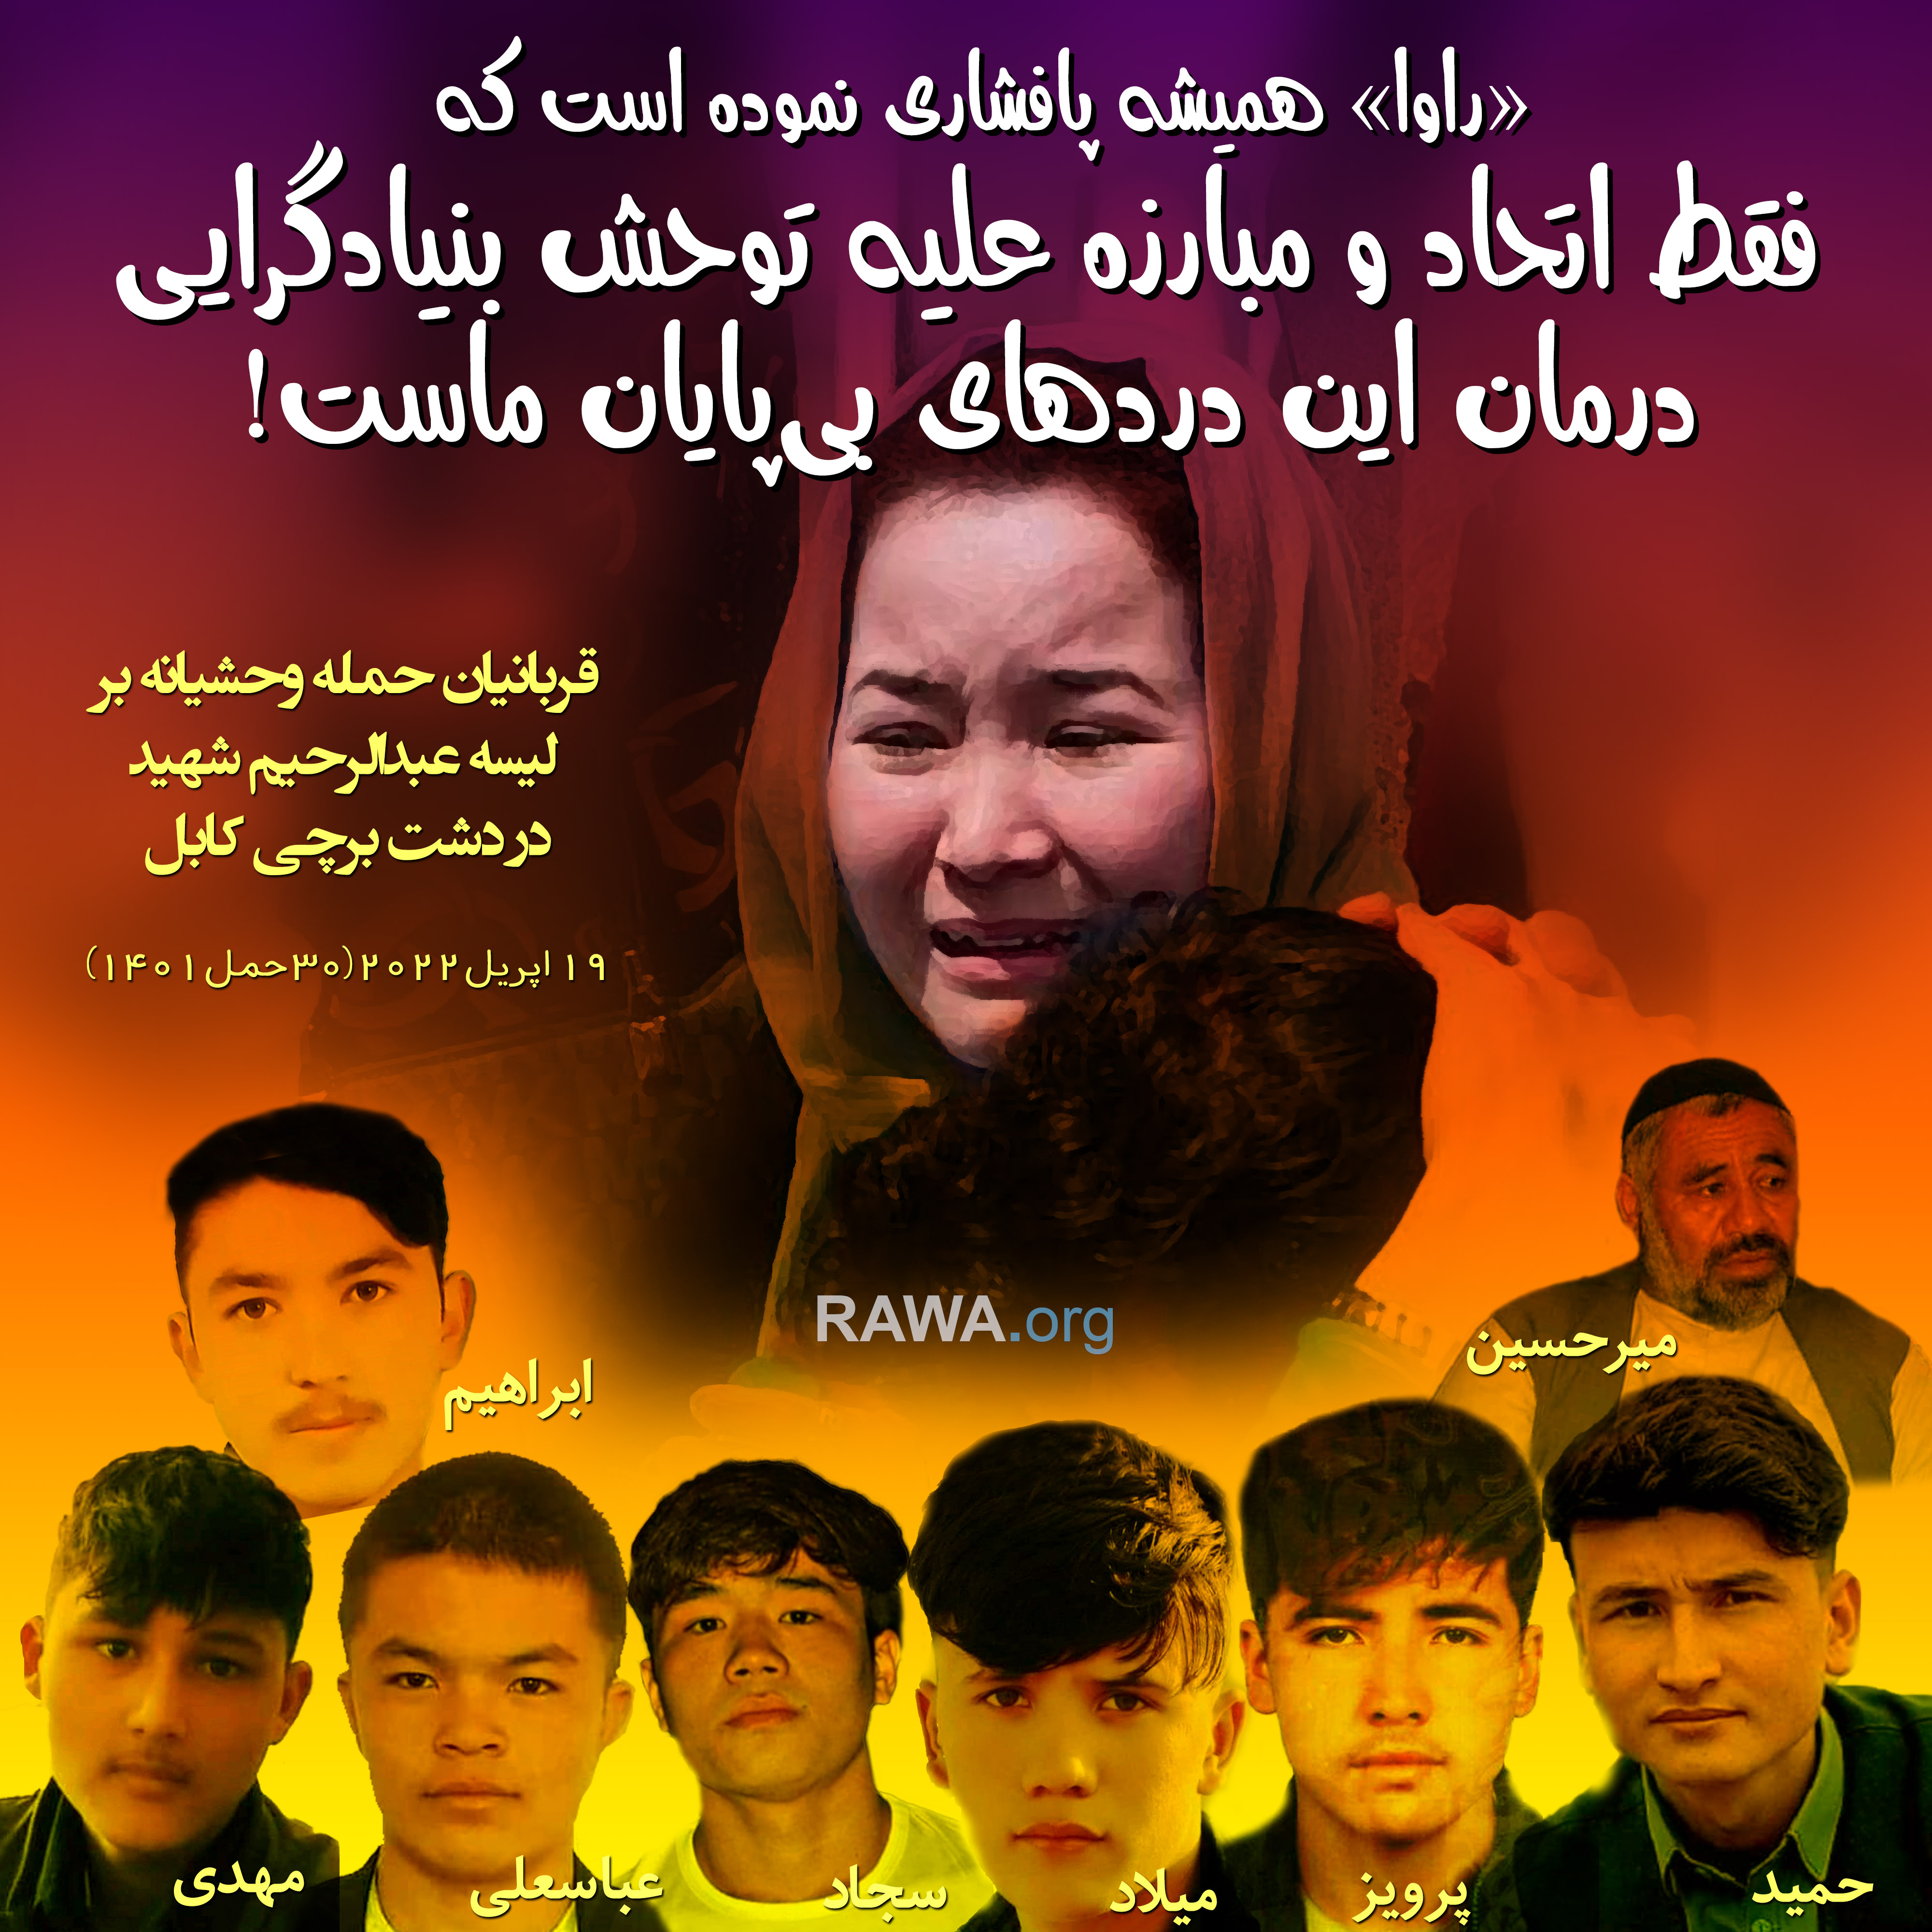 RAWA poster of the school victims